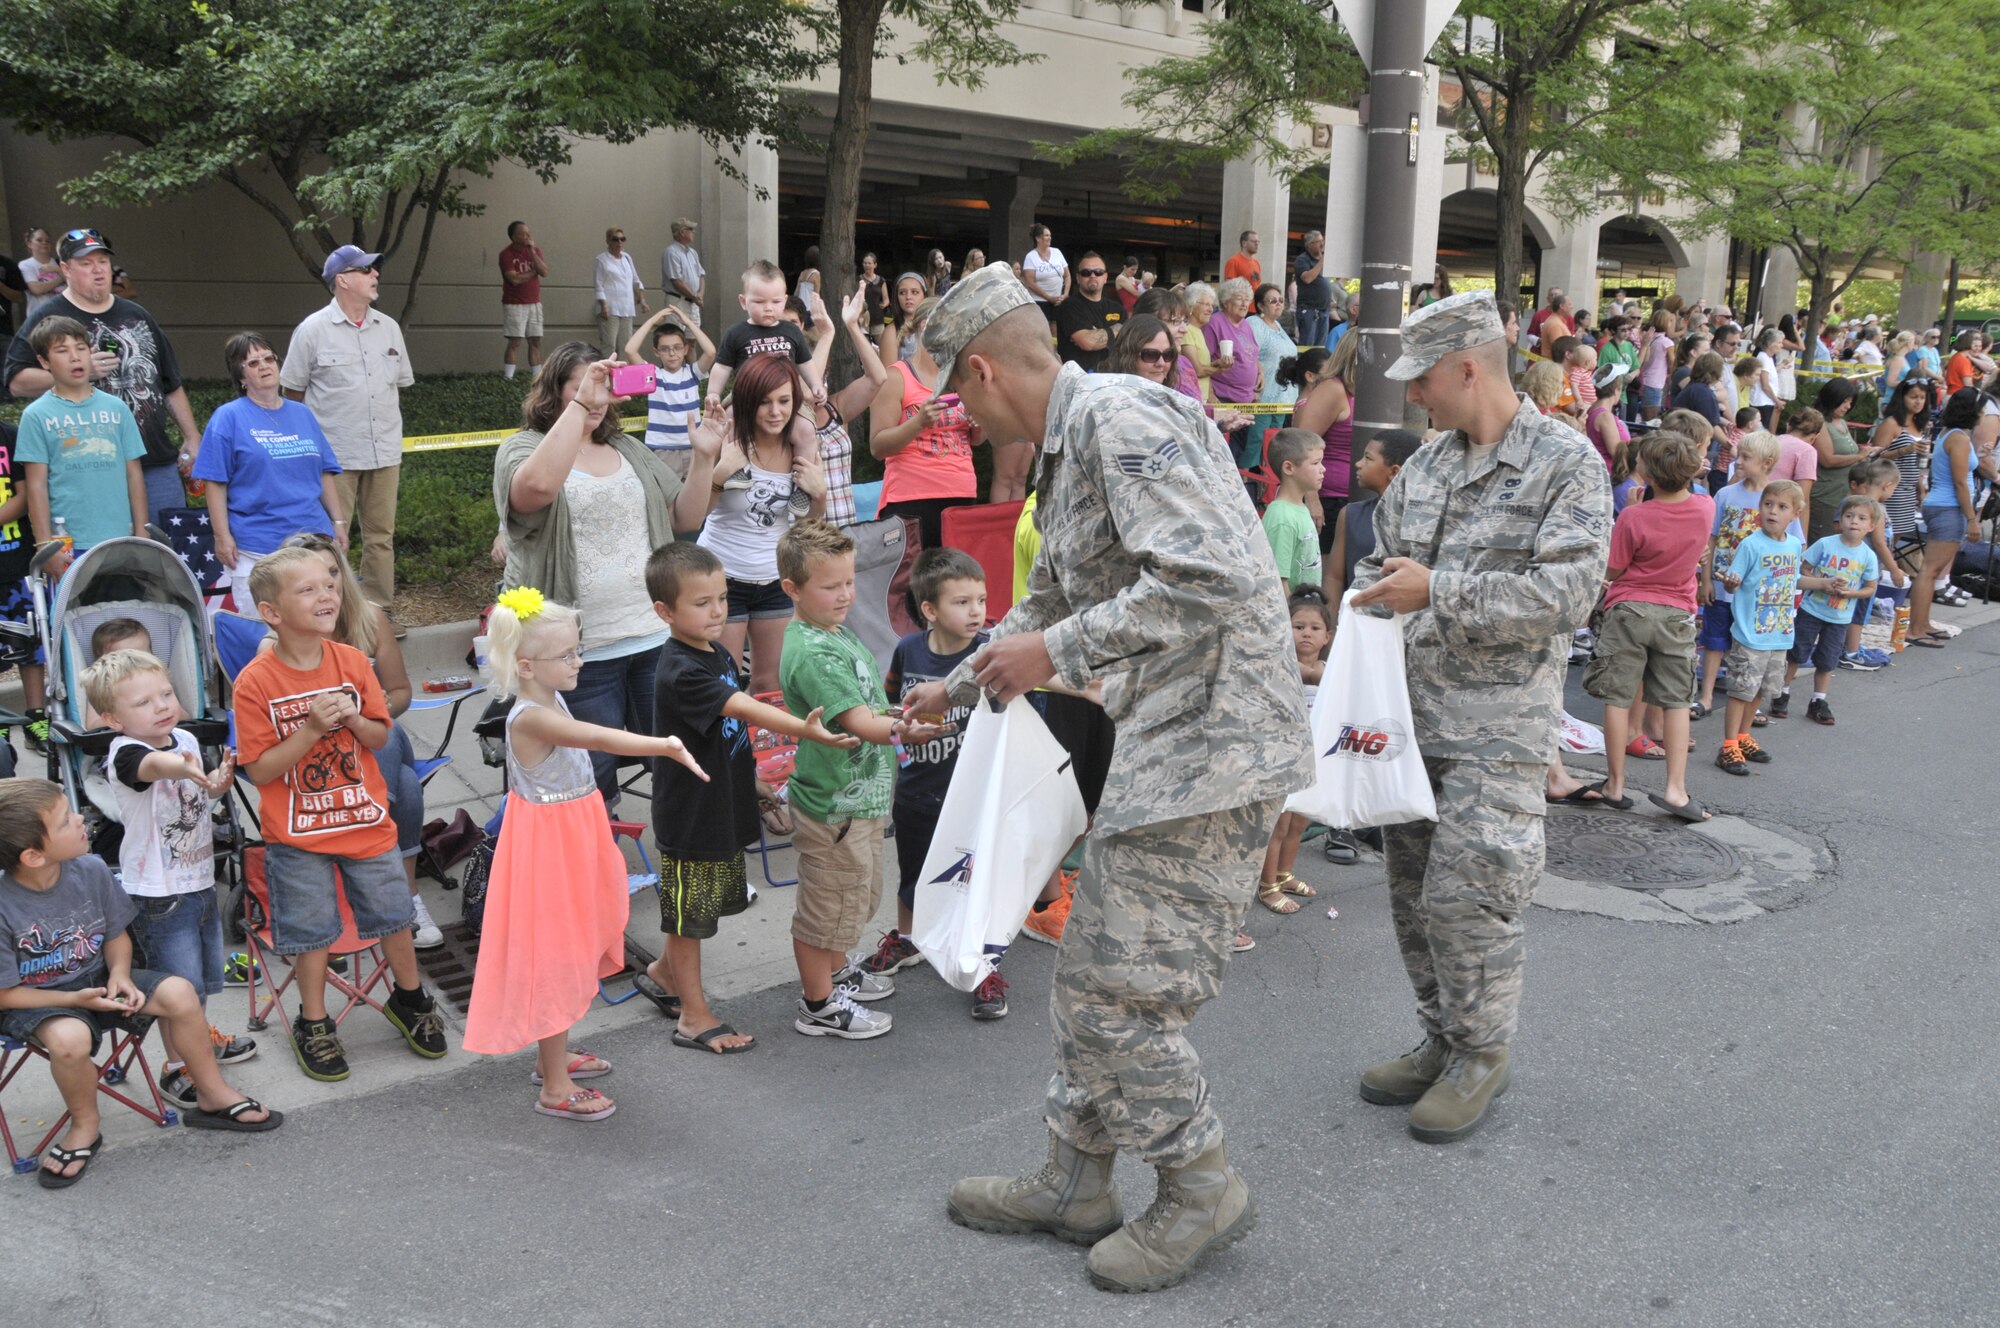 Air Guard members from the 122nd Fighter Wing, Fort Wayne, Indiana hand out candy to spectating children during the 46th Annual Three Rivers Festival Parade, July 12, 2014, held on the streets of downtown Fort Wayne. The yearly parade, attended by approximately 50,000 people, allows the wing to show its community support. (Air National Guard photo by Airman 1st Class Justin Andras/Released)